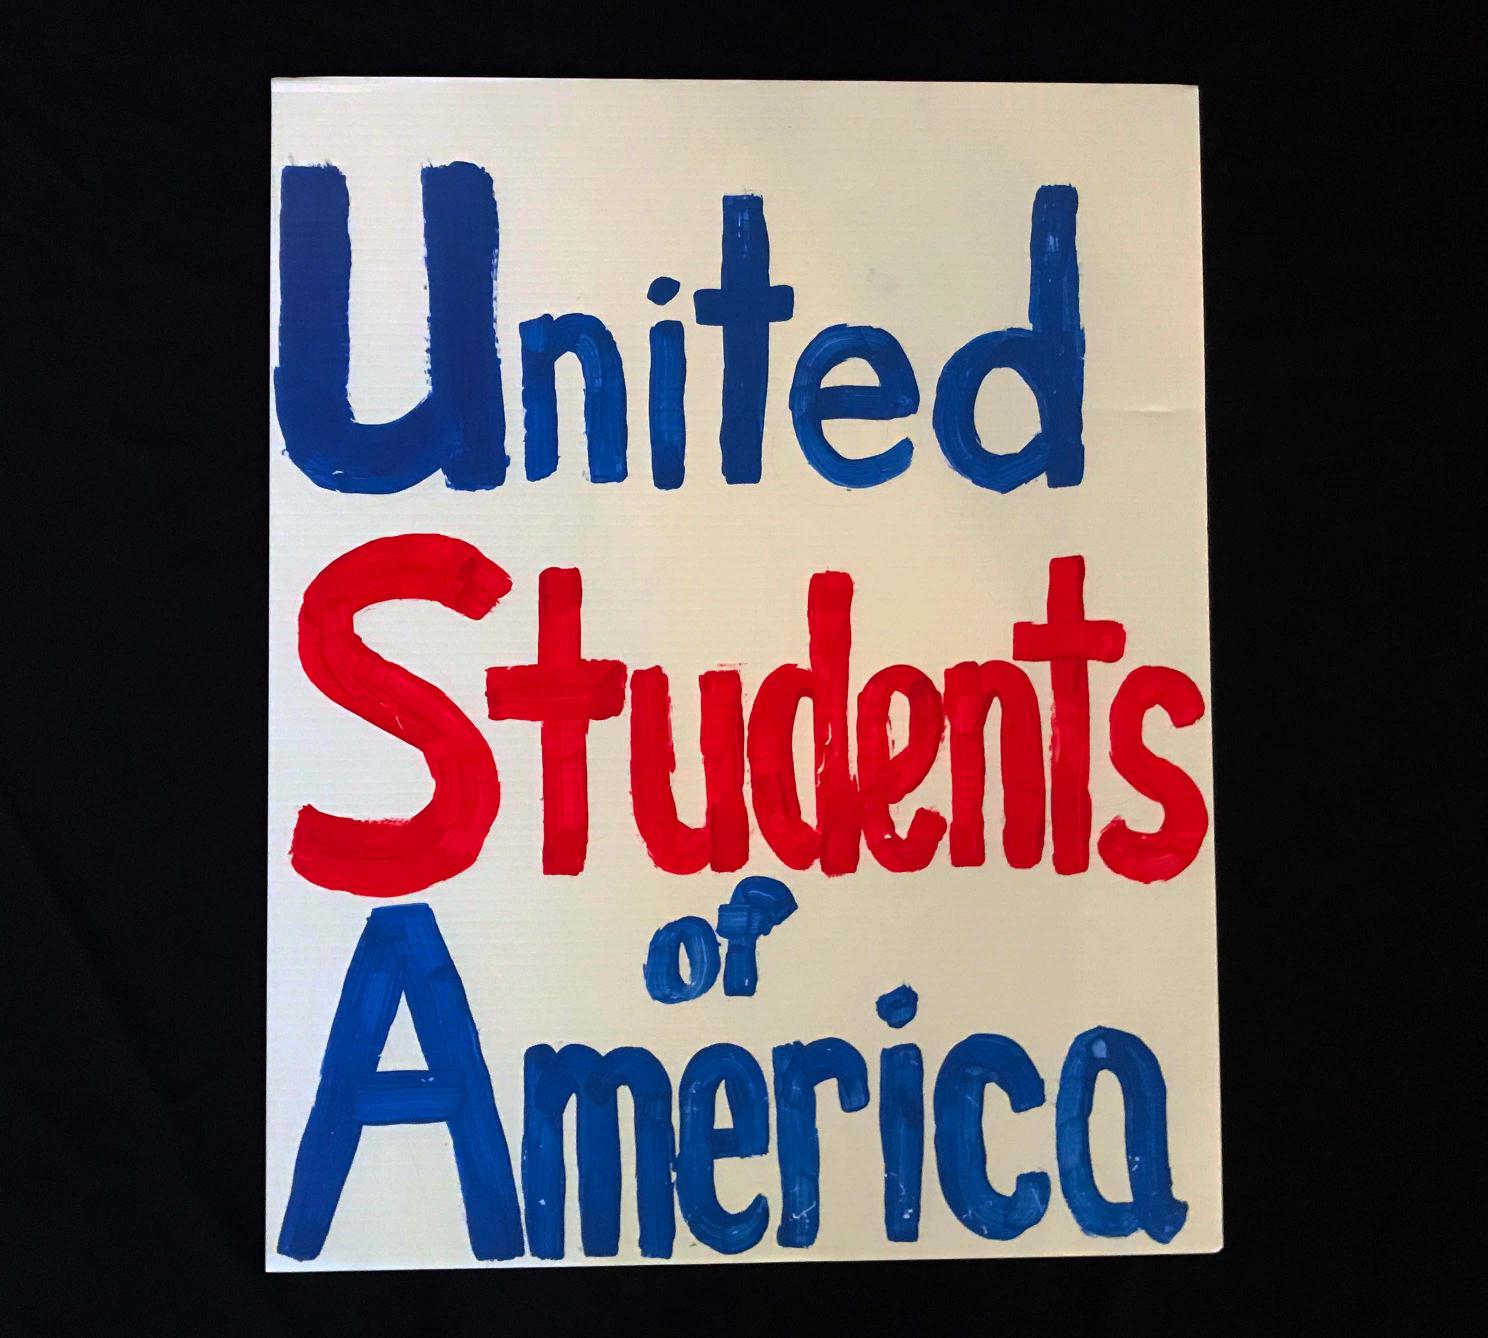 Charlotte March for Our Lives, 2018. Sign reads: "United Students of America"